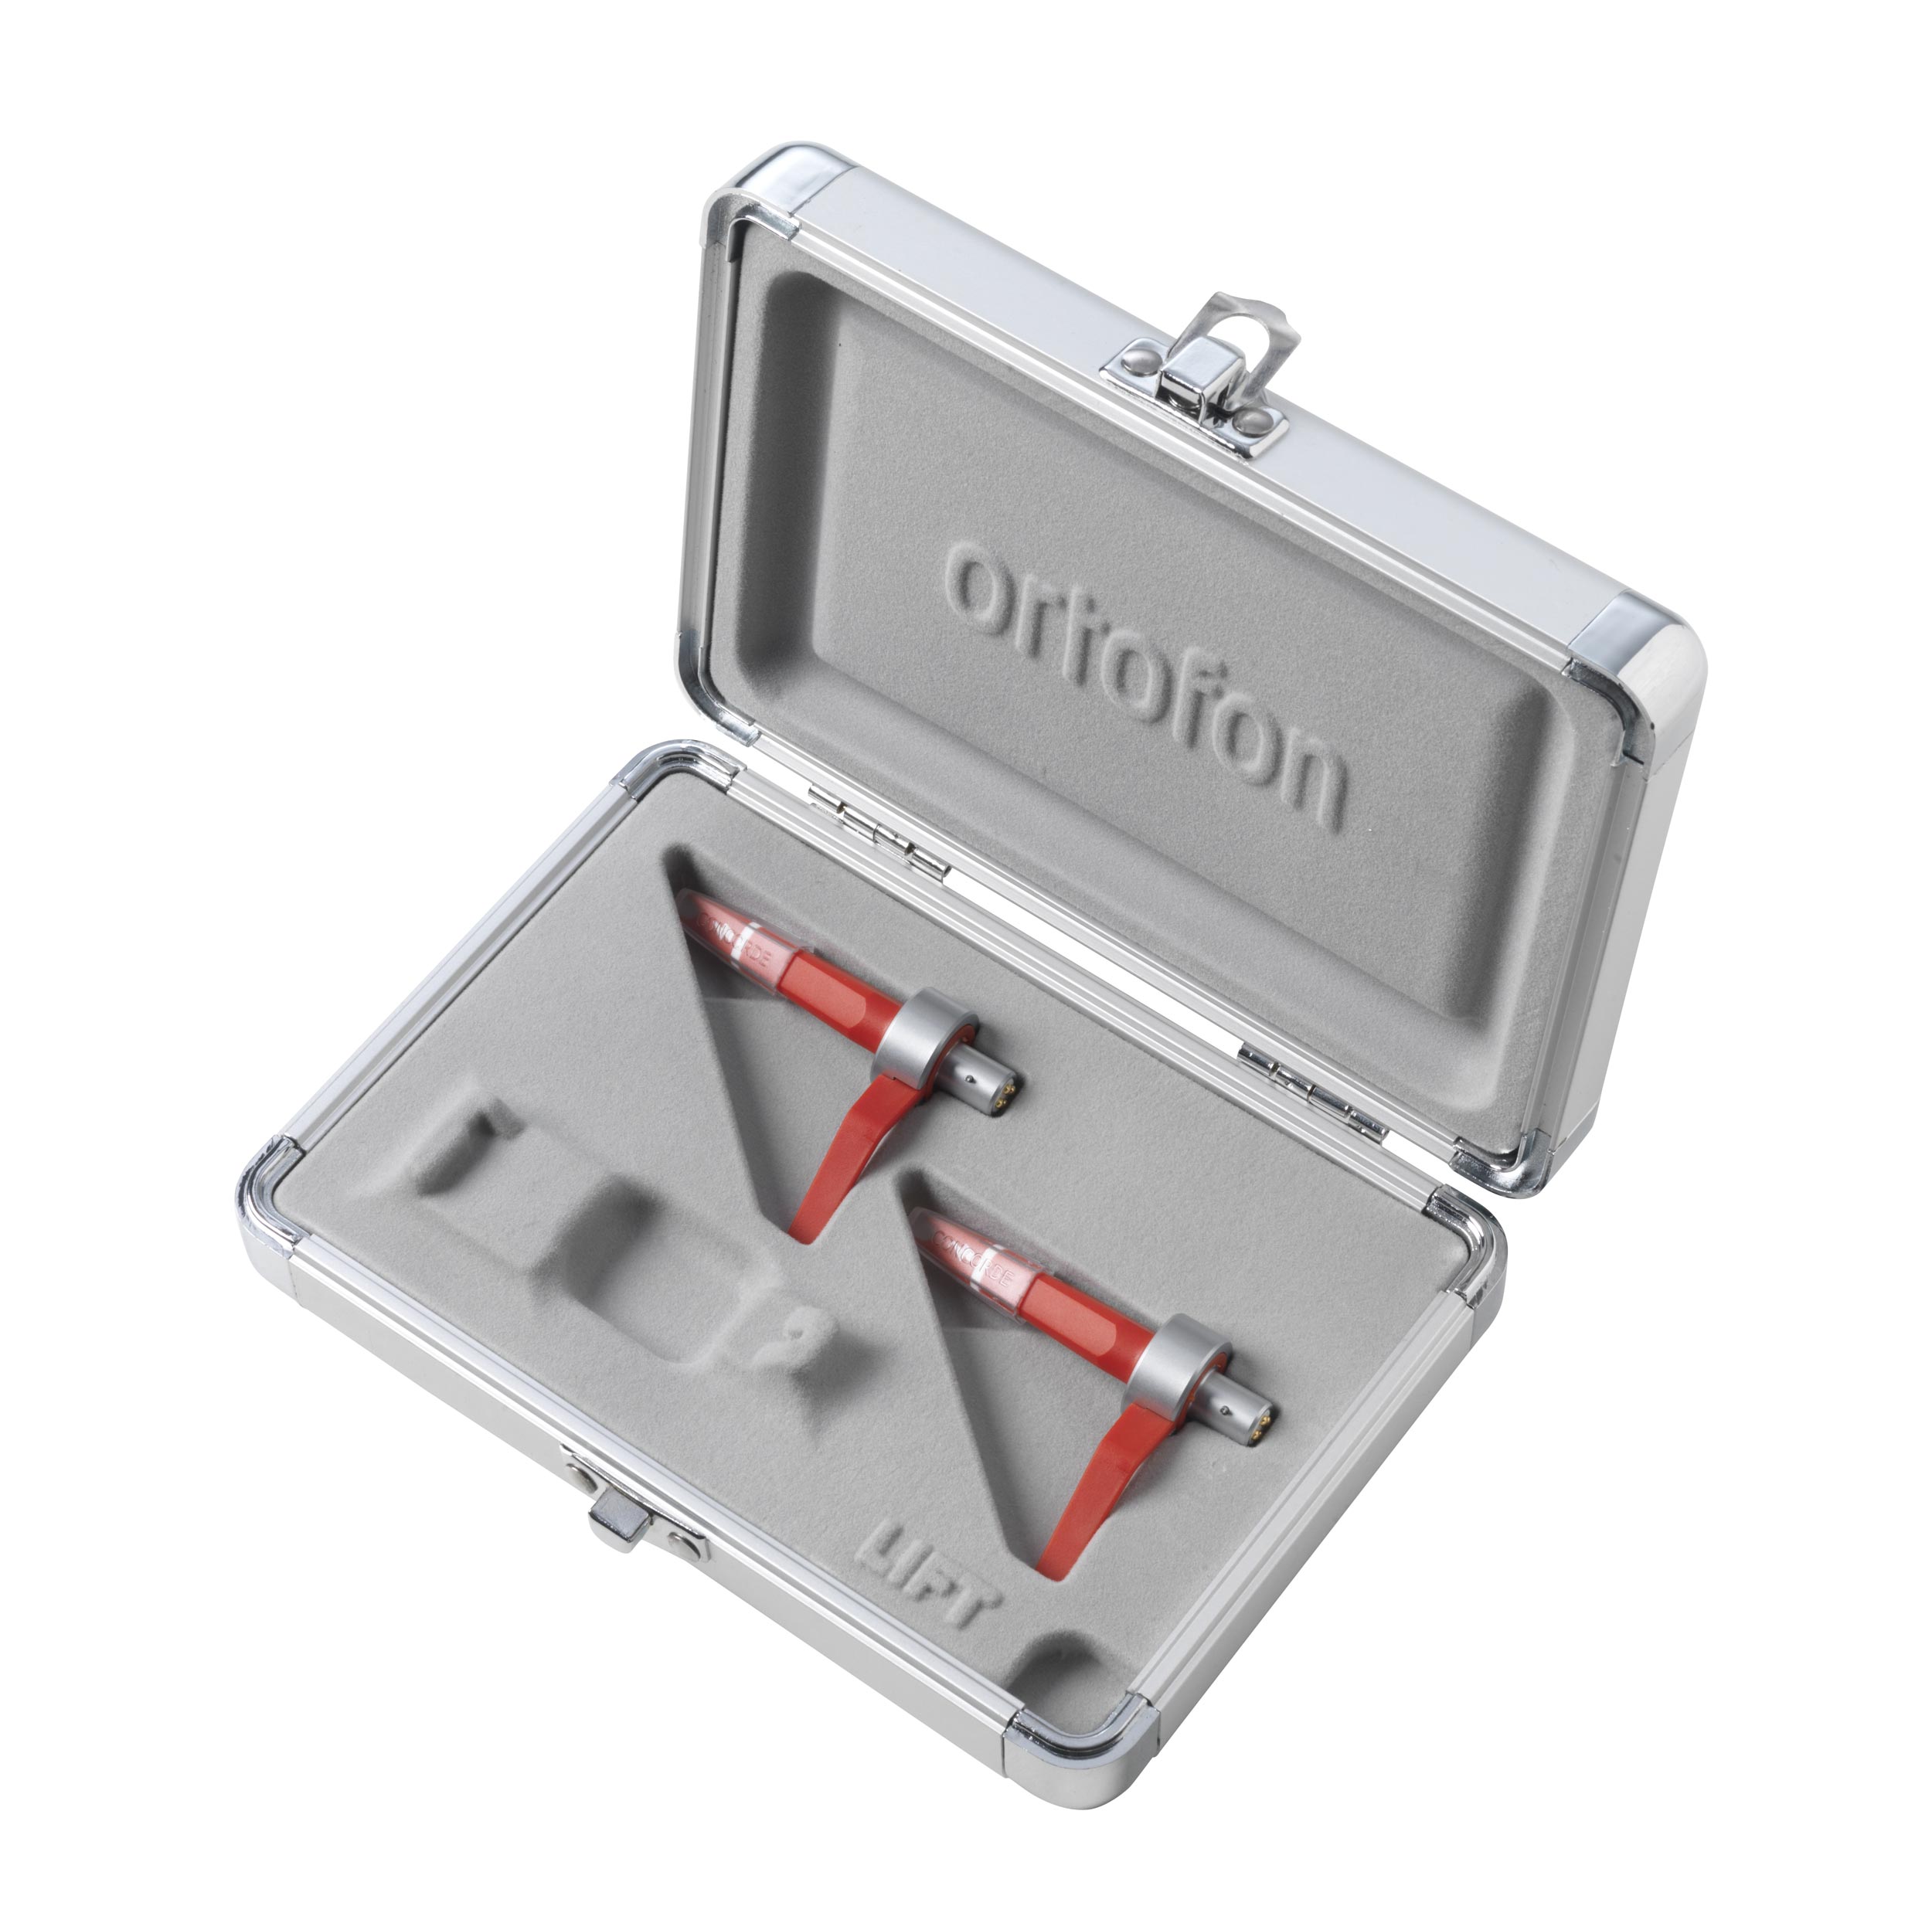 ORTOFON CONCORDE MKII DIGITAL - Twin Cartridges with Pre-Installed 